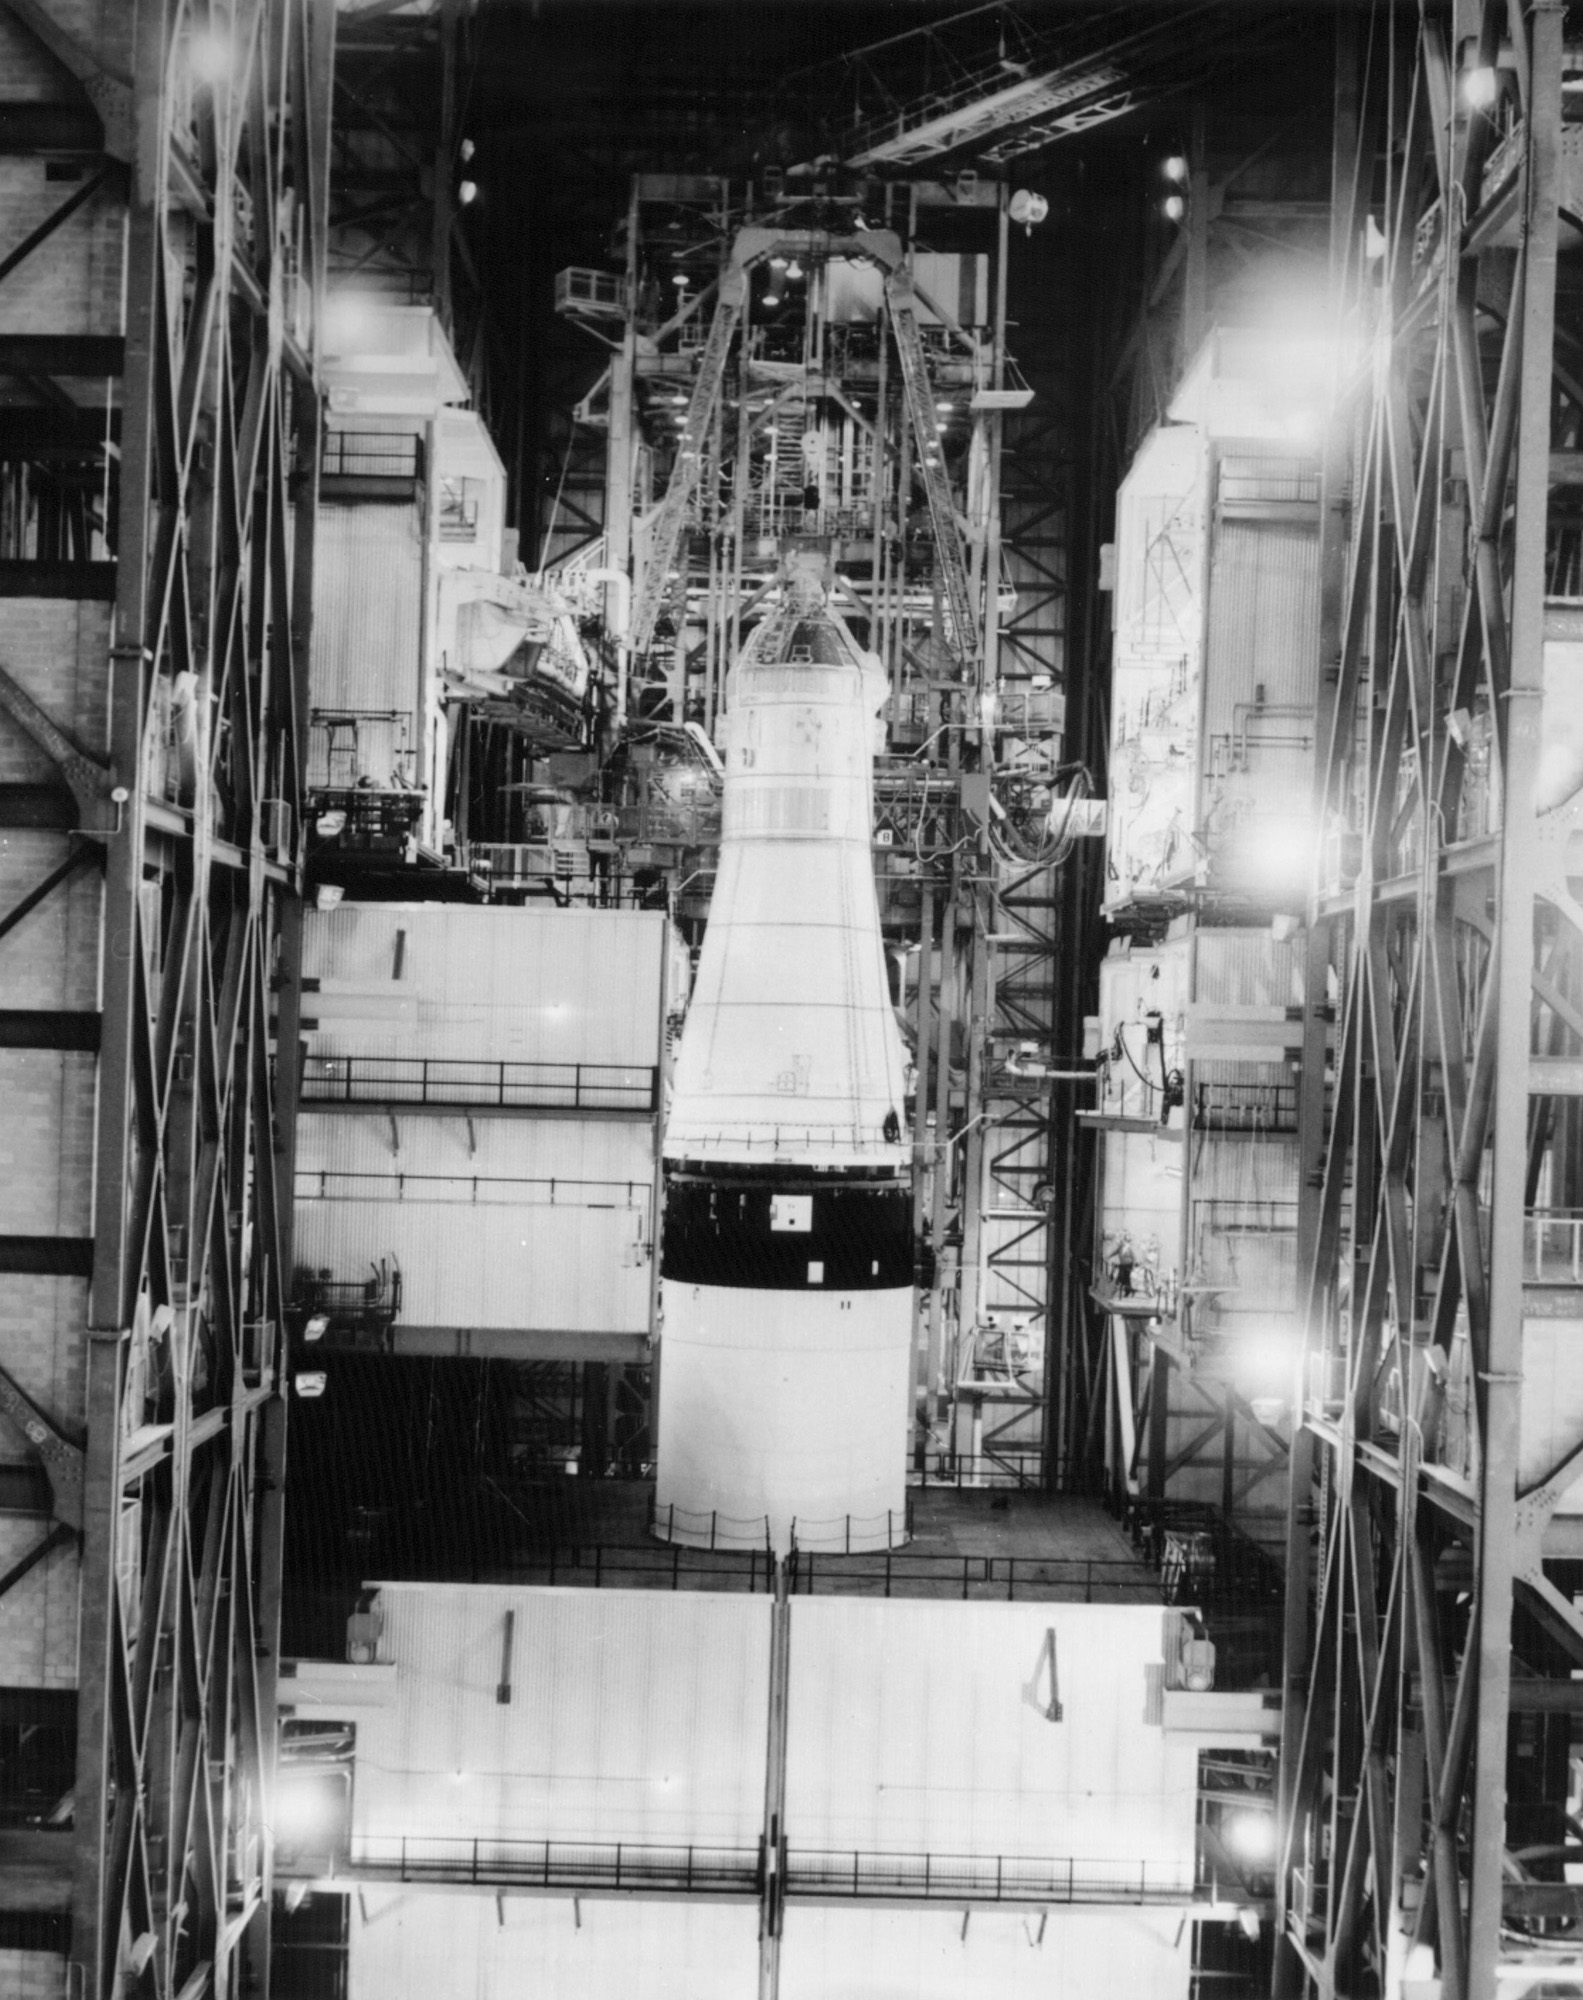 apollo-spacecraft-106-is-mated-to-saturn-v-launch-vehicle.jpg